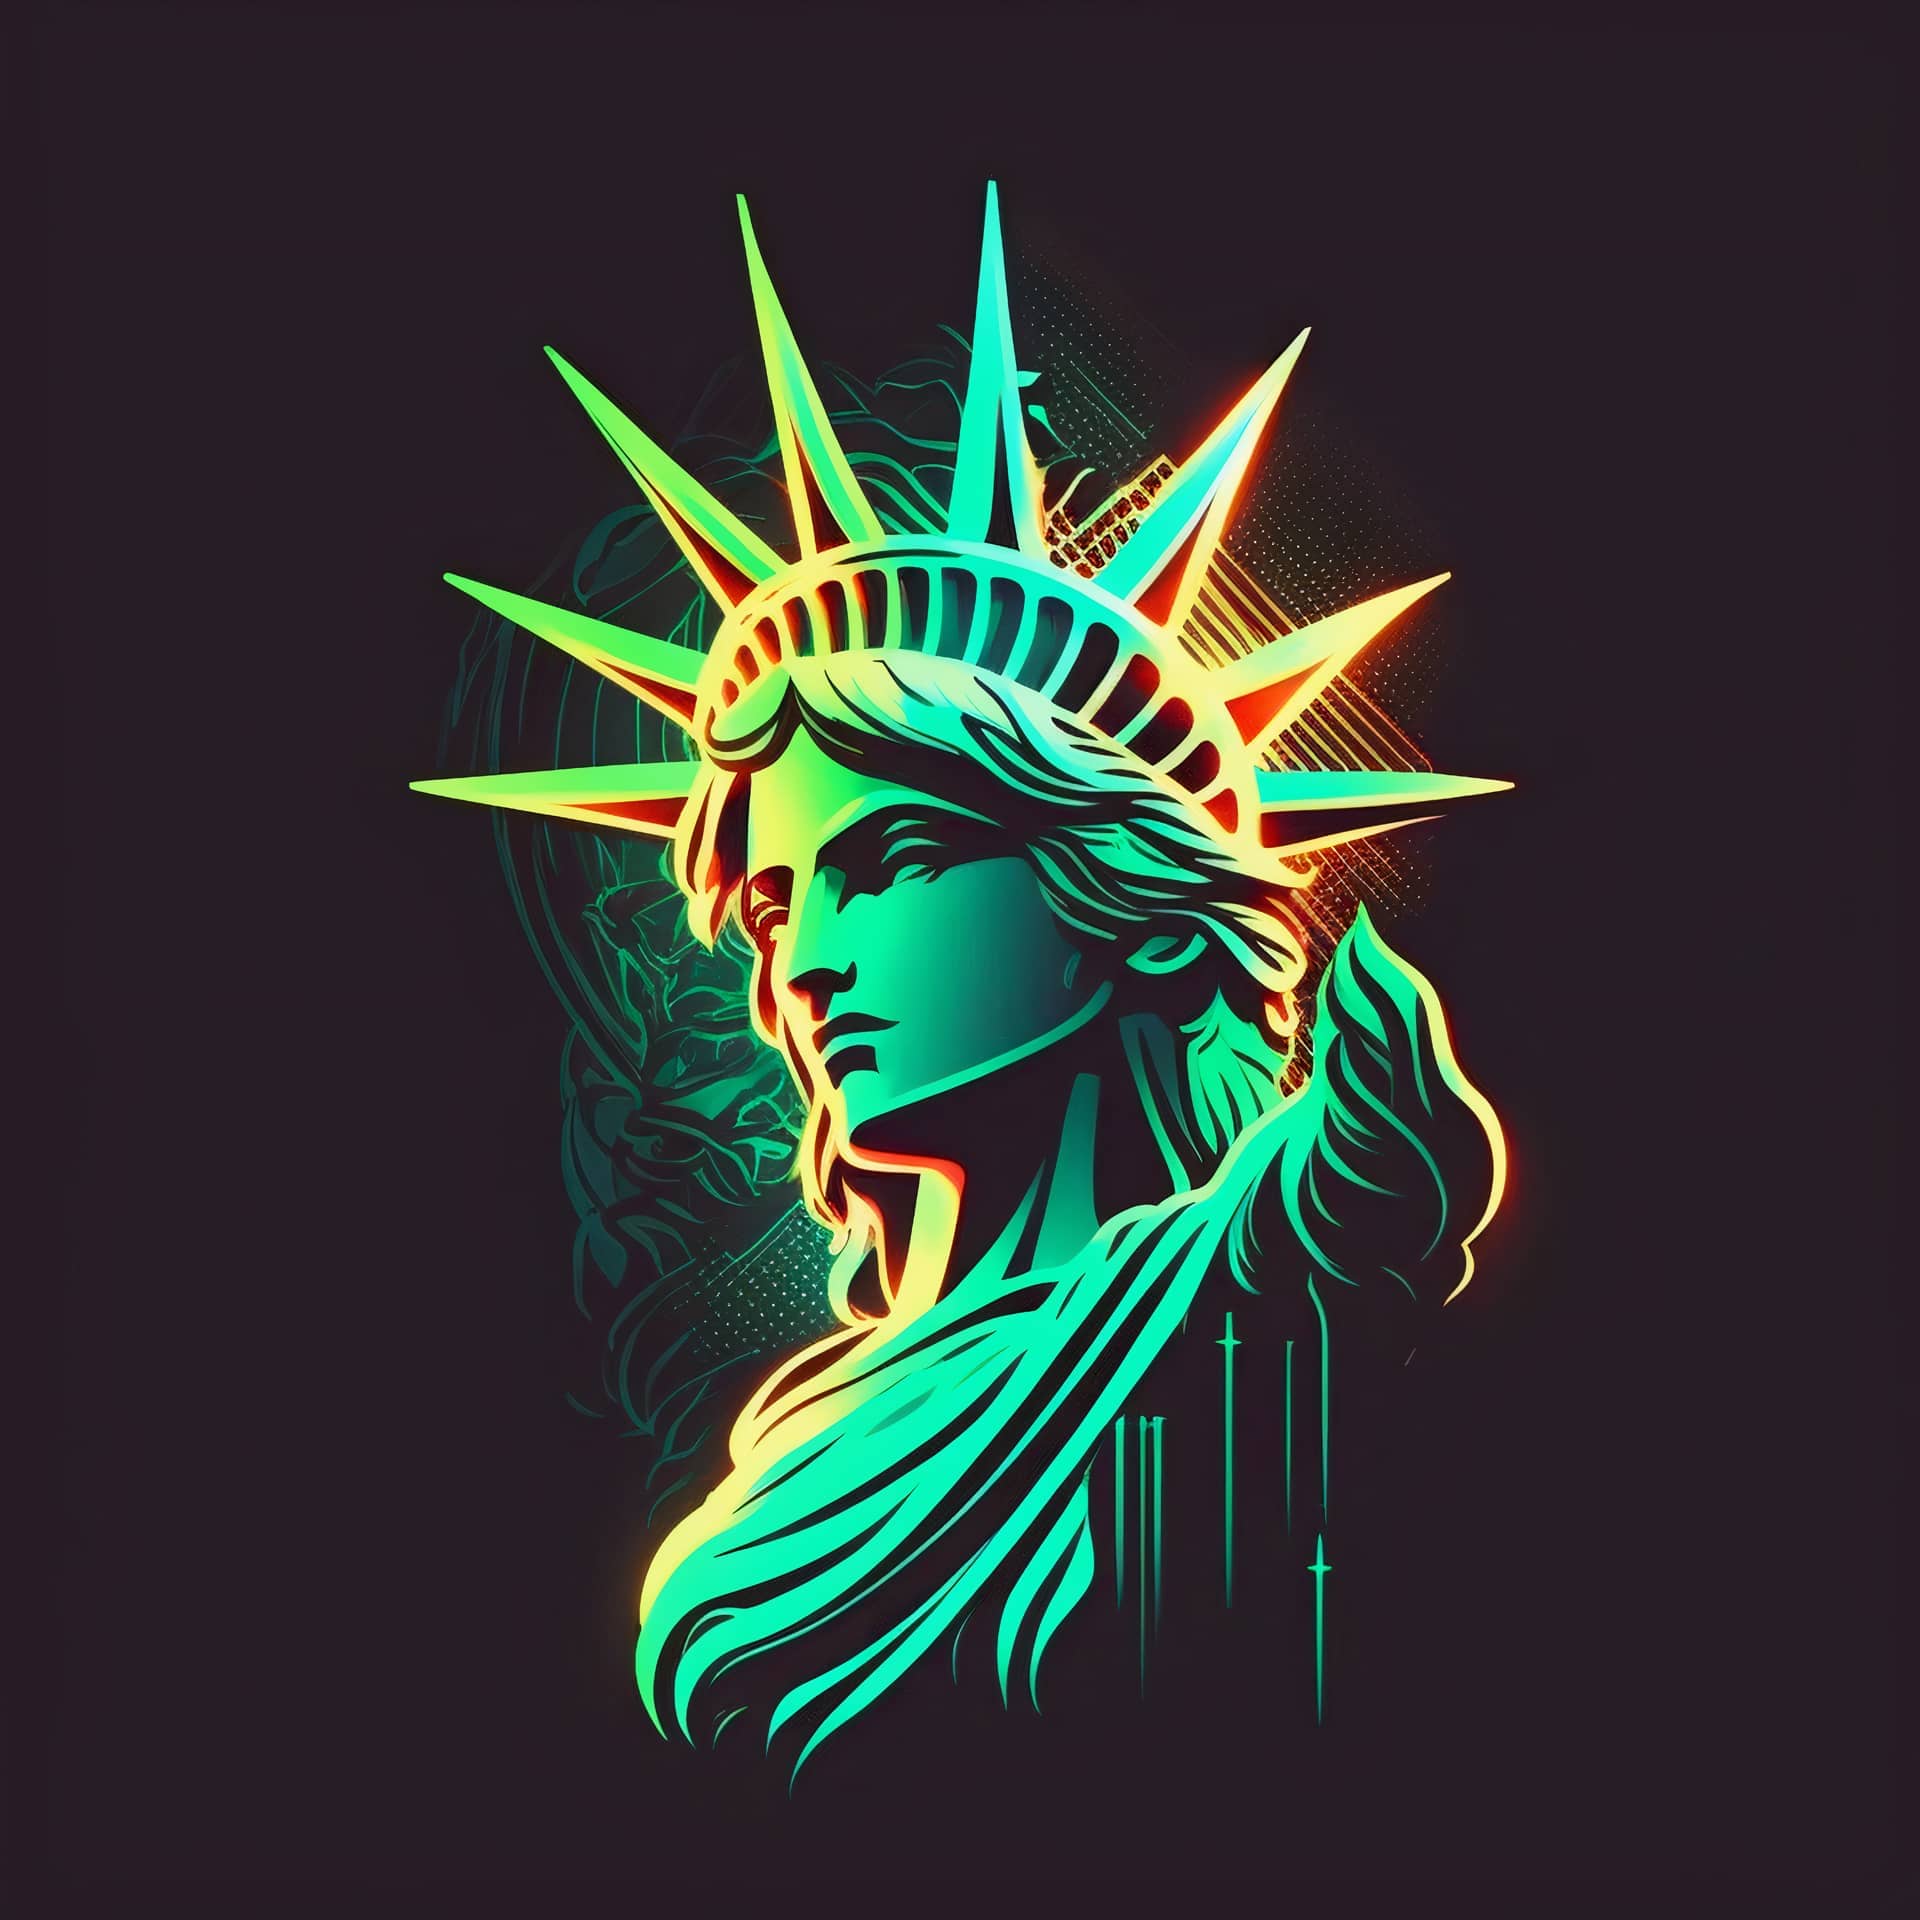 Neon style statue liberty illustration new york excellent picture